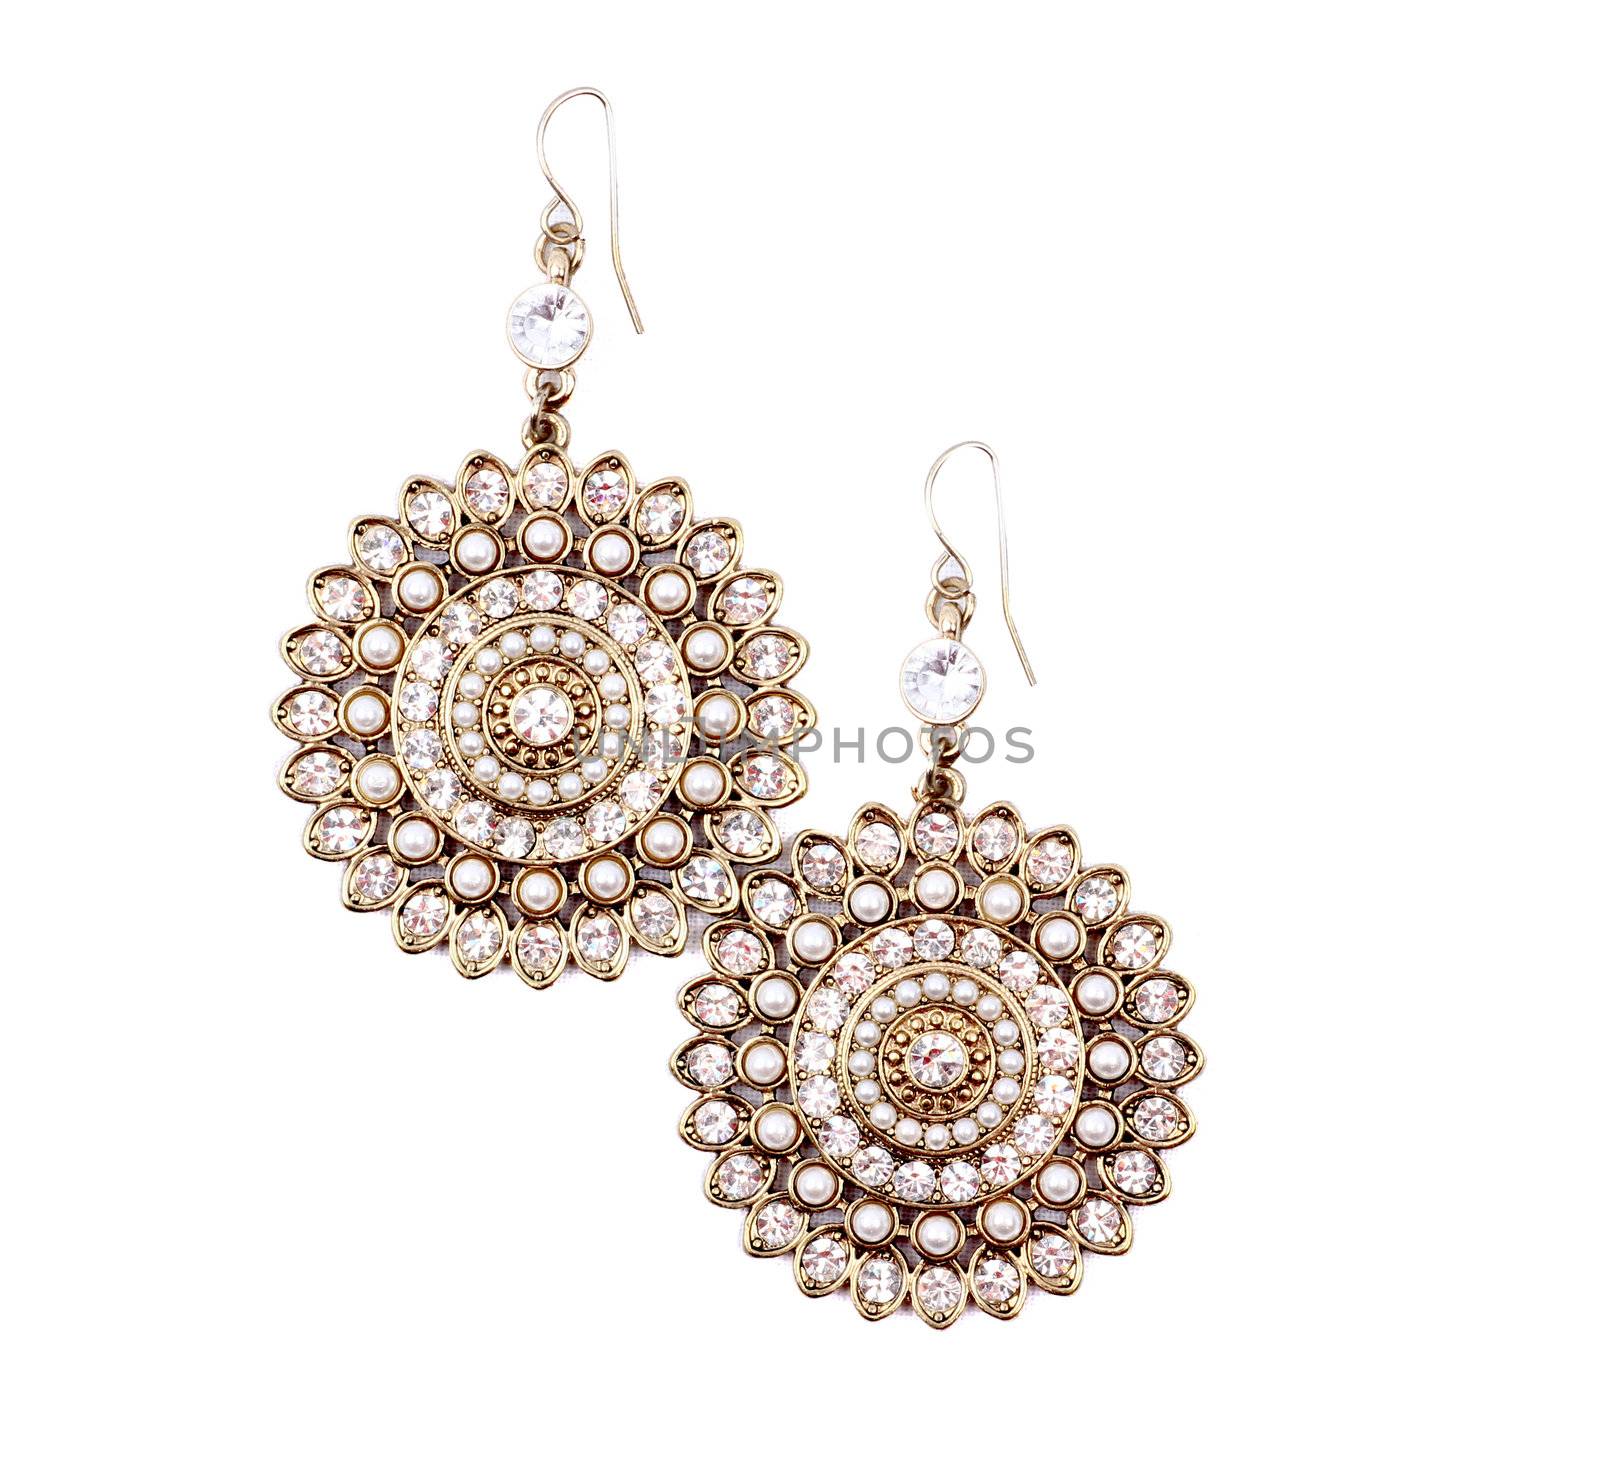 Pair of earrings isolated on the white background.